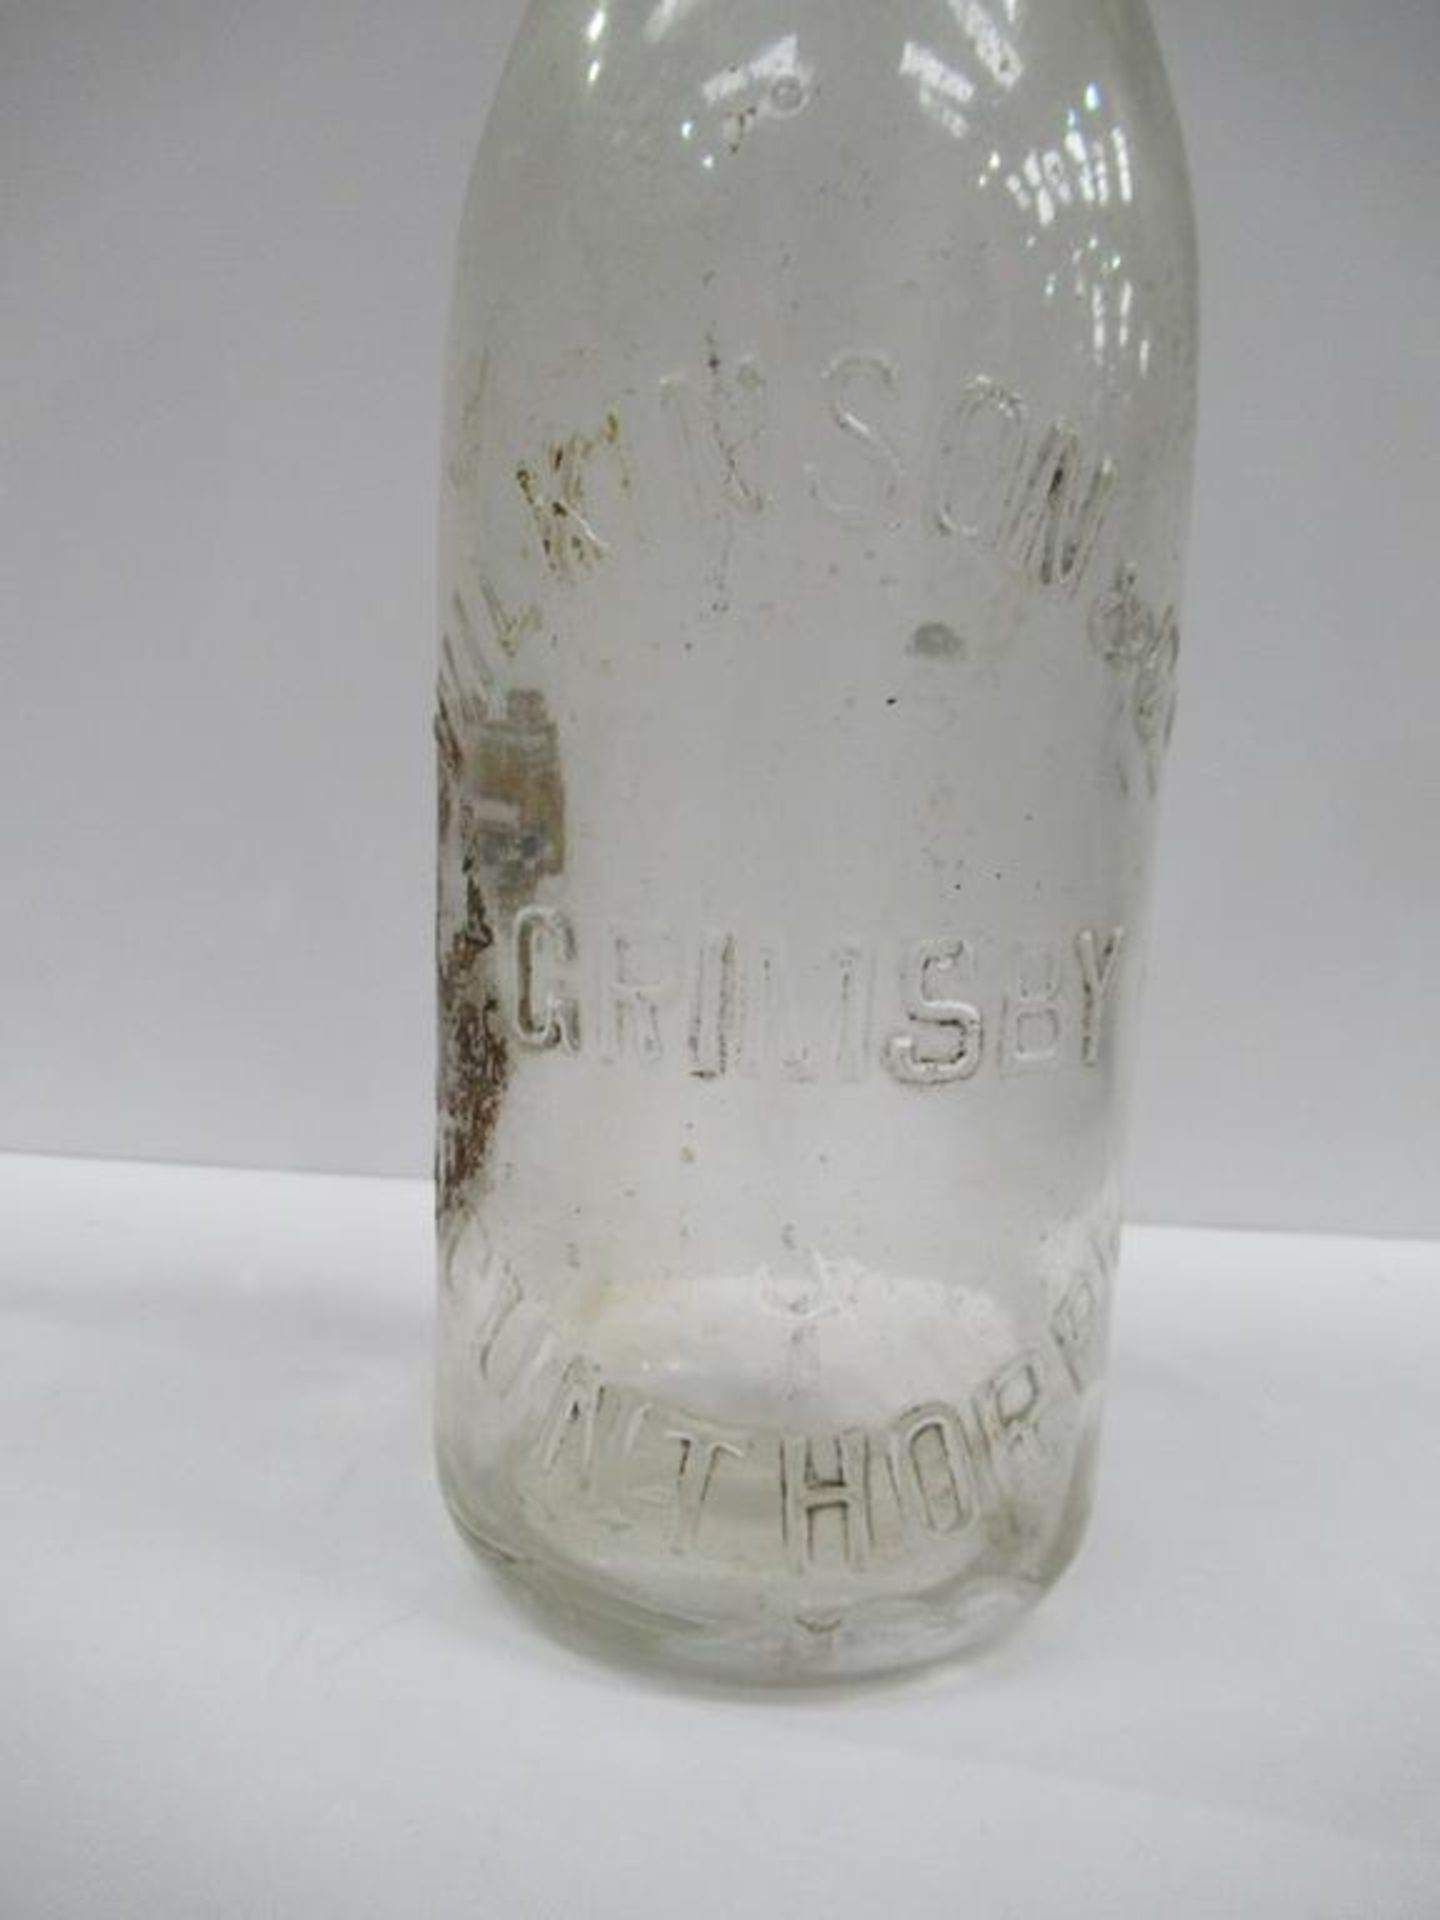 4x Grimsby (3x Scunthorpe) Wilkinsons & Co. bottles - Image 11 of 14